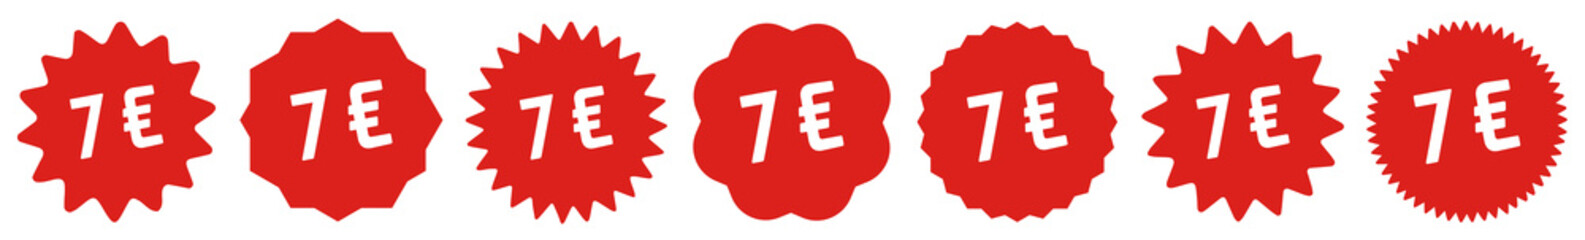 7 Price Tag Red | 7 Euro | Special Offer Icon | Sale Sticker | Deal Label | Variations